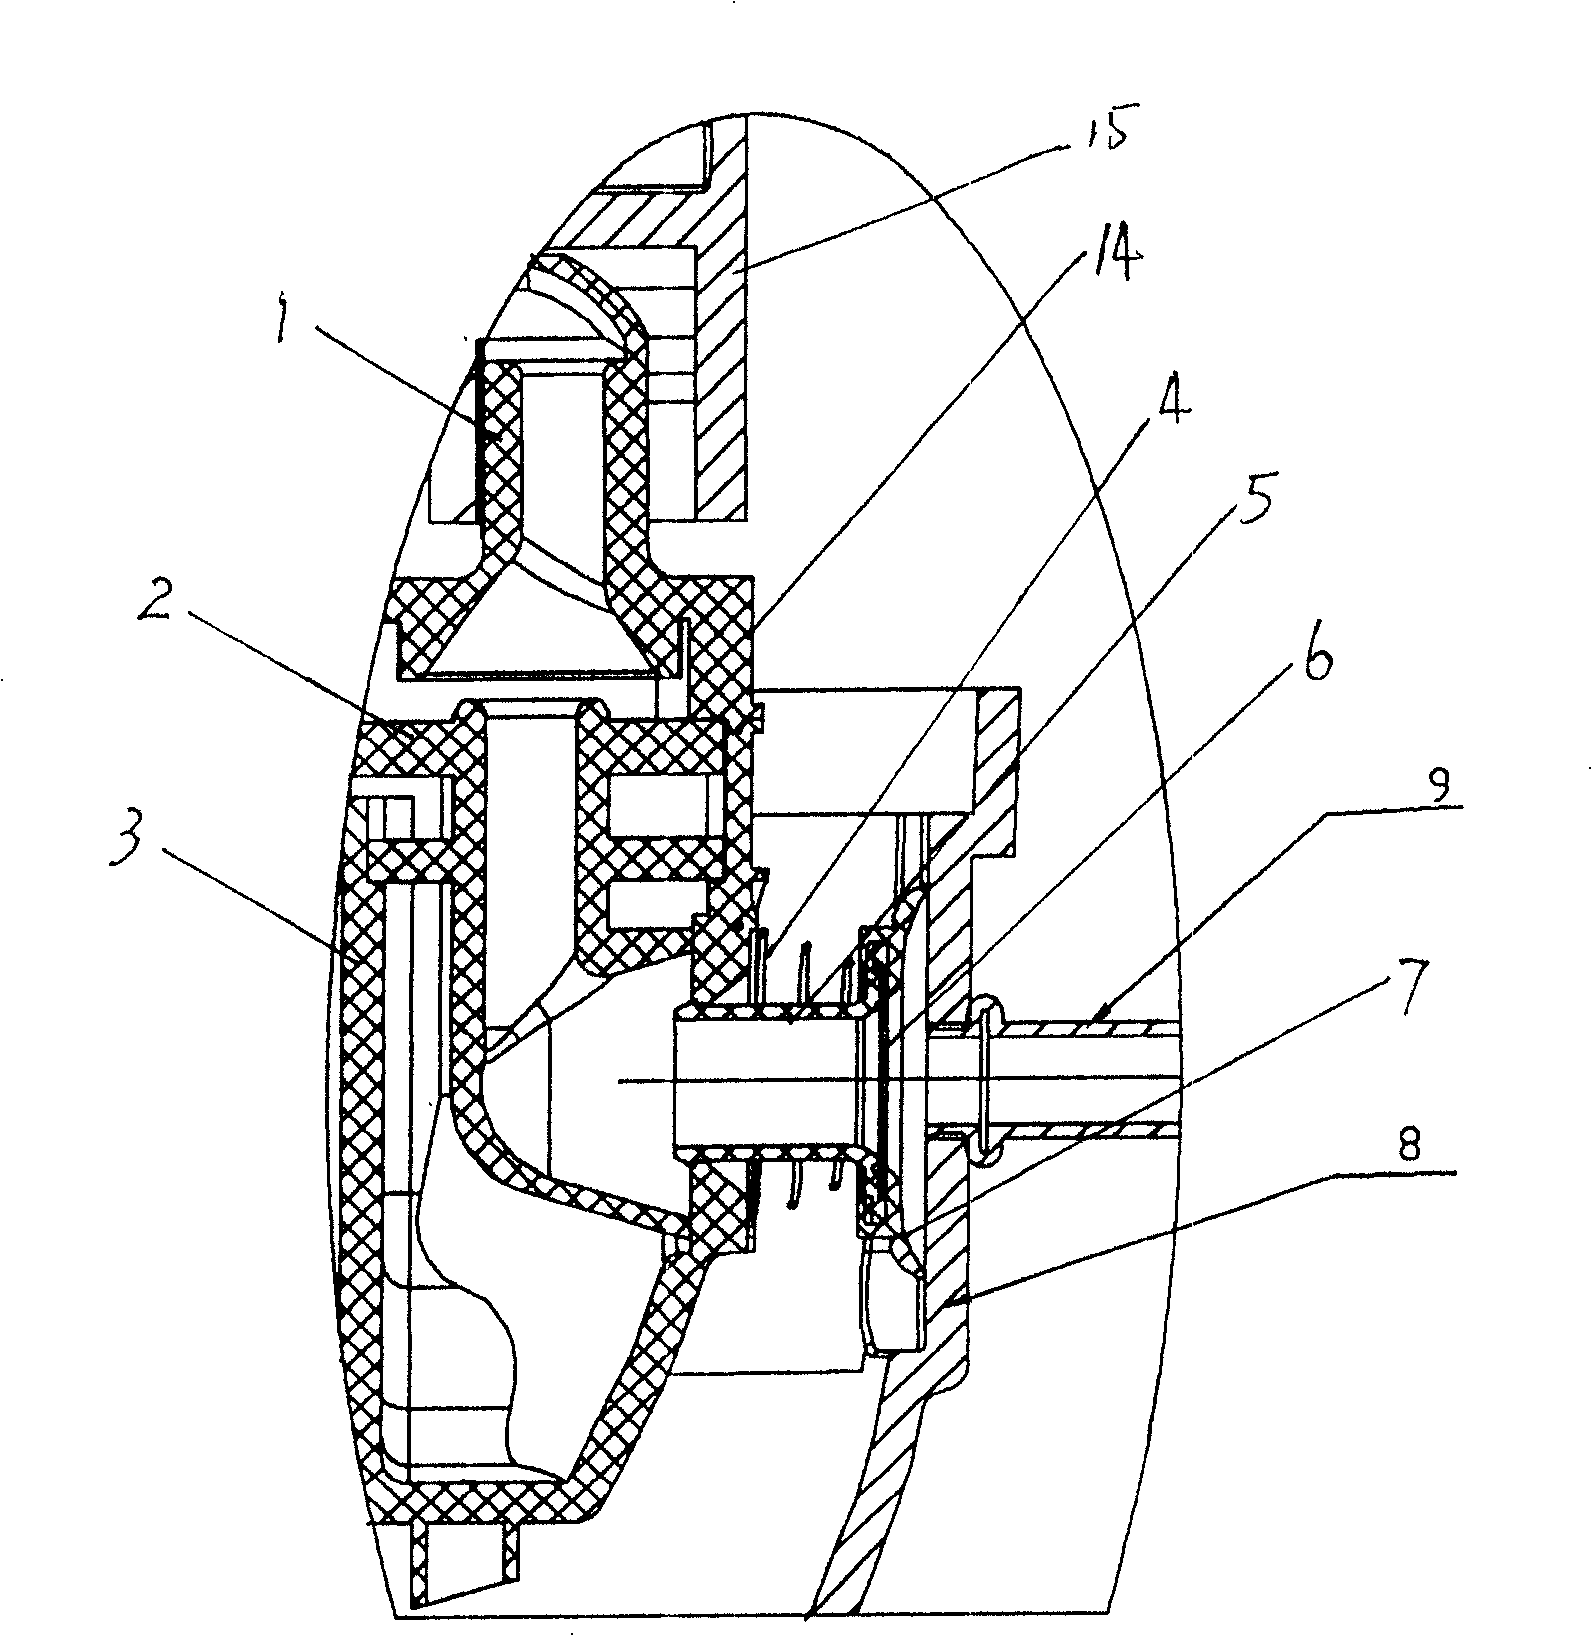 Compressor capable of directly gettering through impacting air suction port by spring